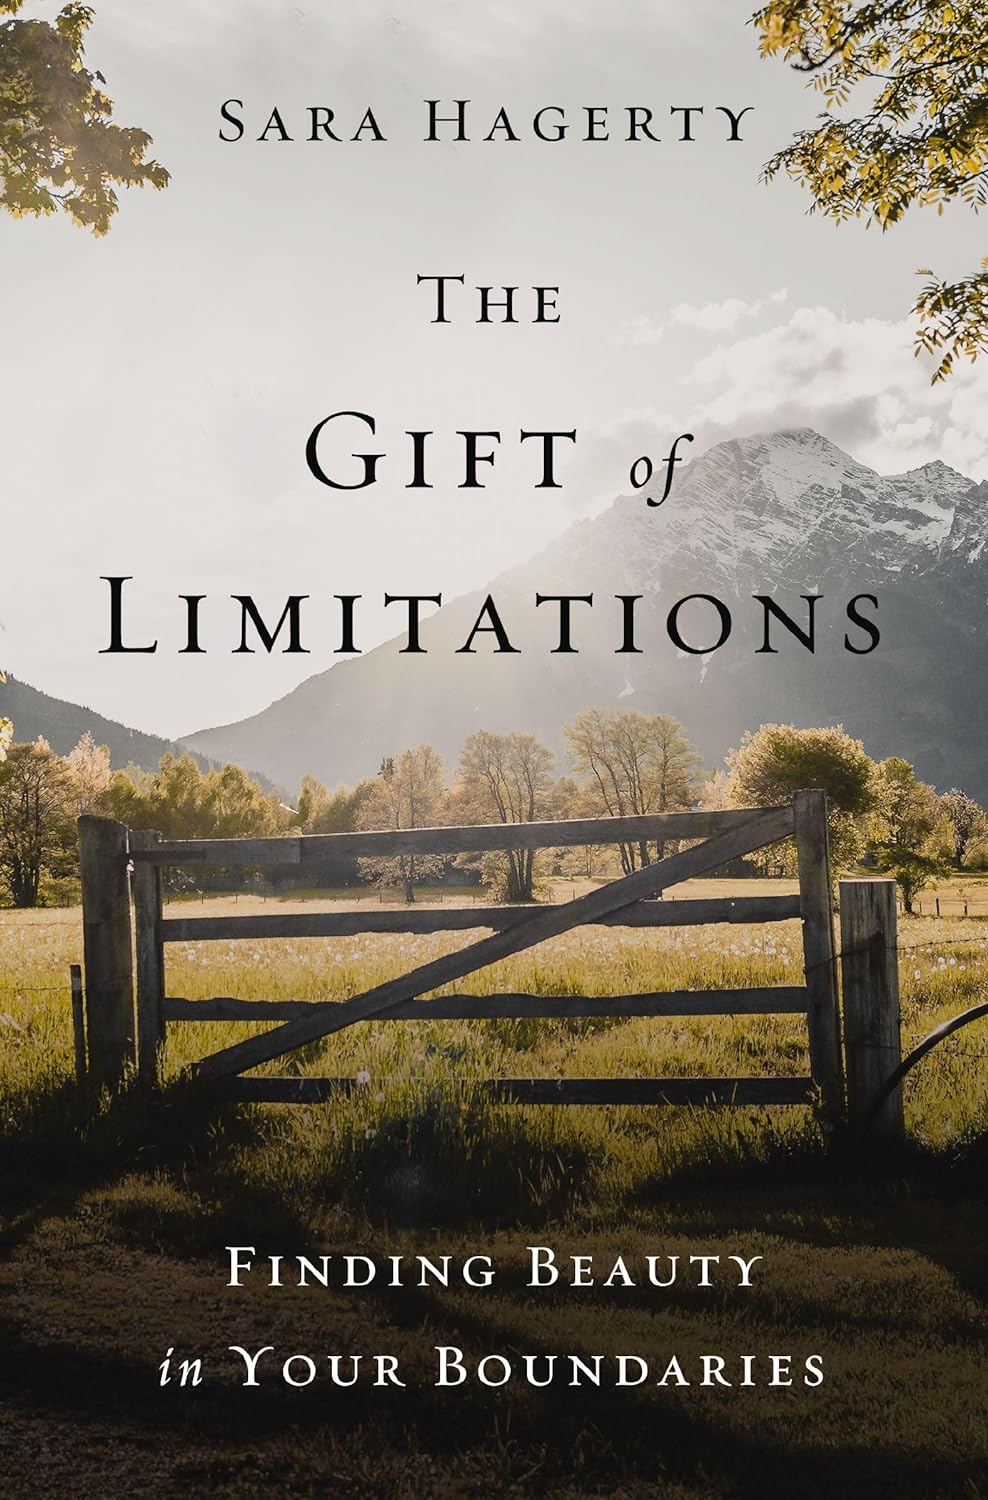 Image for "The Gift of Limitations"